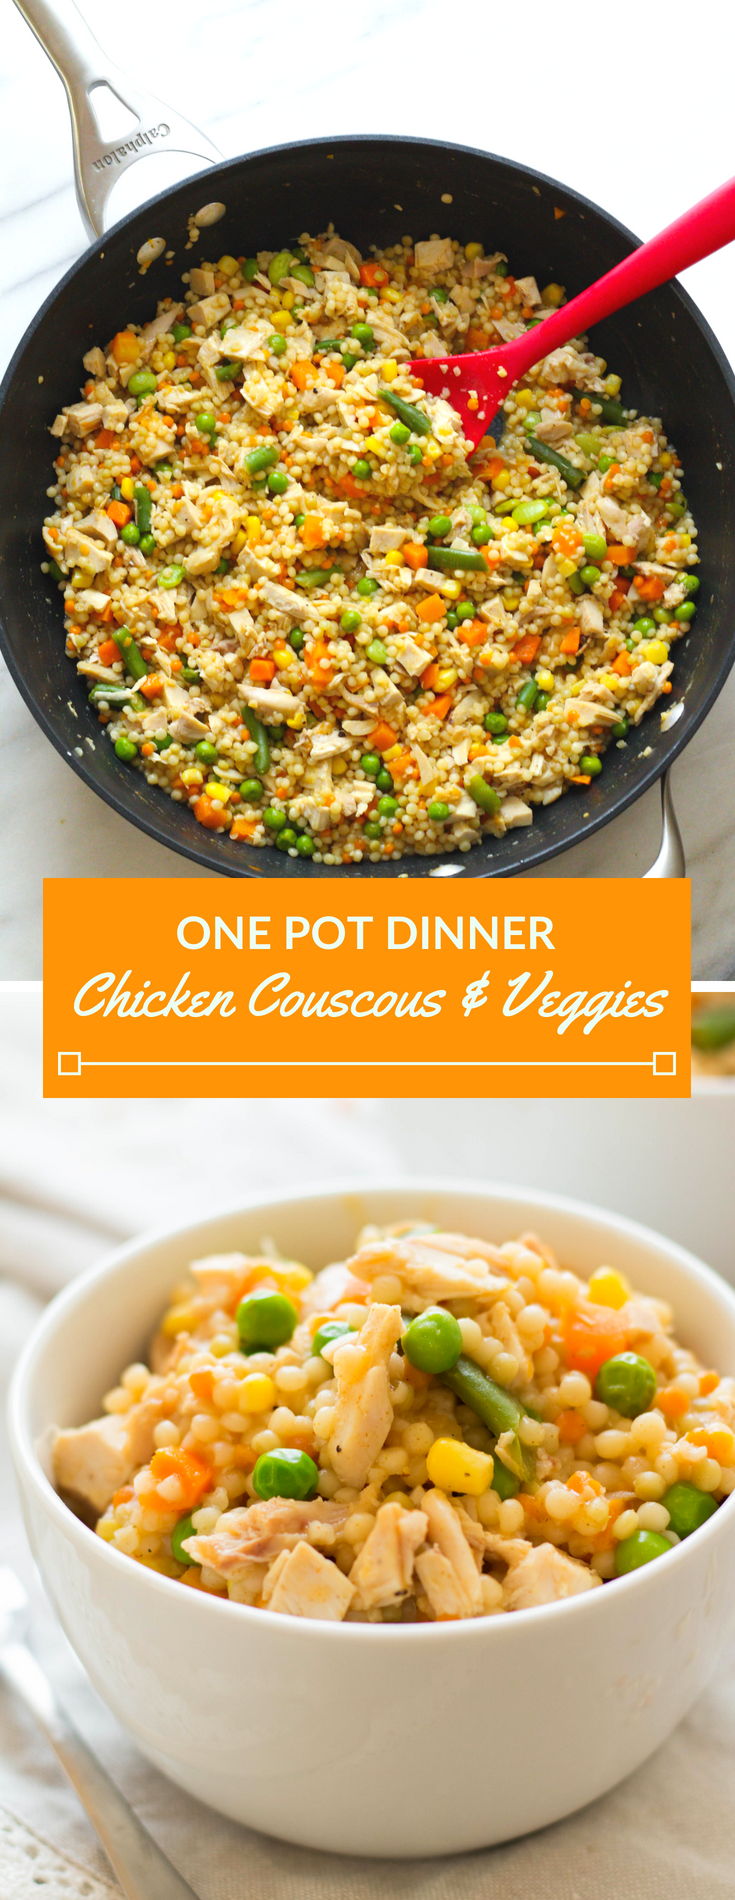 Pearled couscous chicken, simmered in broth with mixed veggies. An easy, delicious dinner that can be ready in less than 15 minutes.